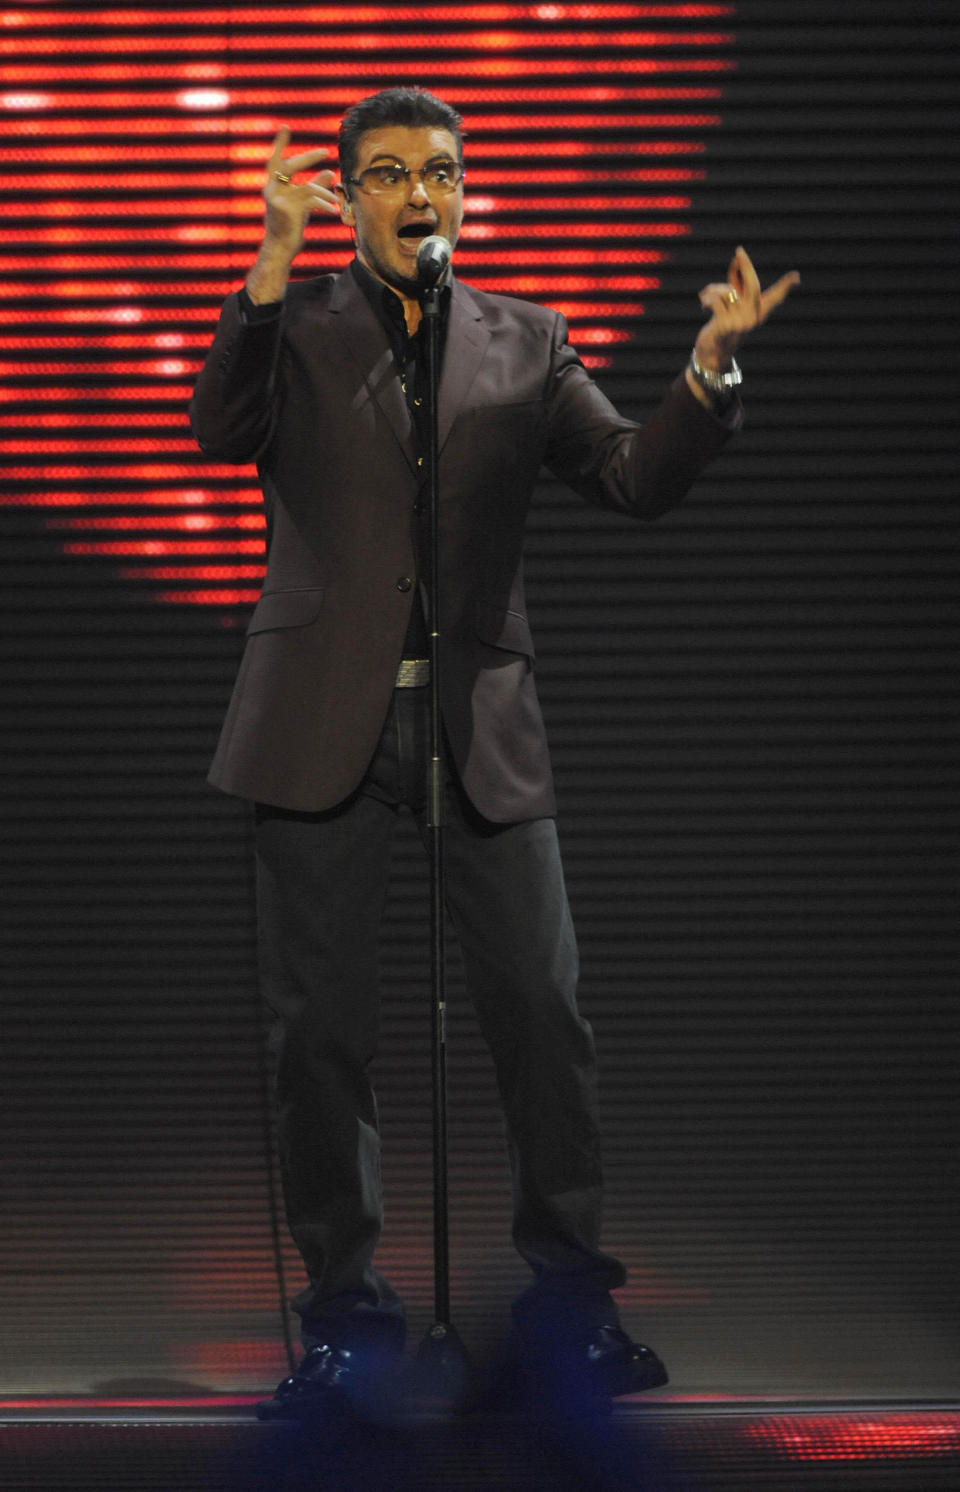 George Michael is seen performing in concert at Earls Court, London.